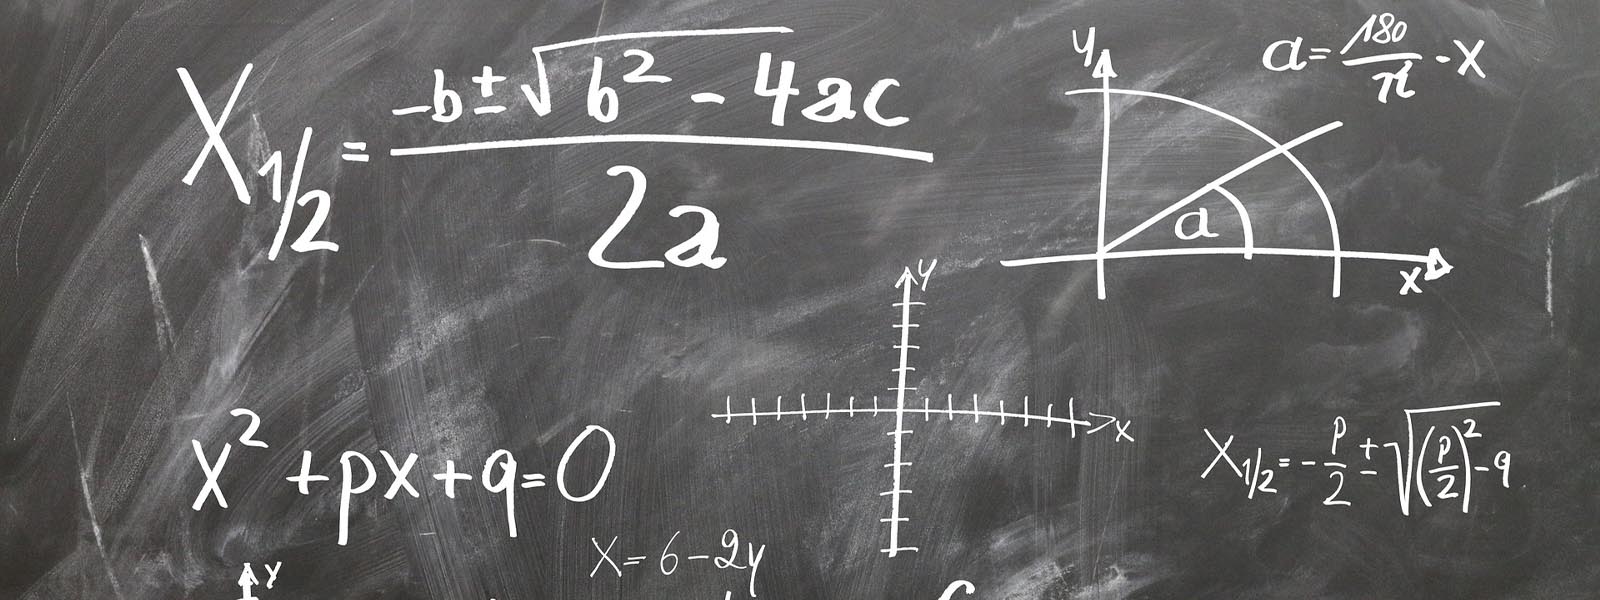 Numbers and mathematical formulae on a blackboard